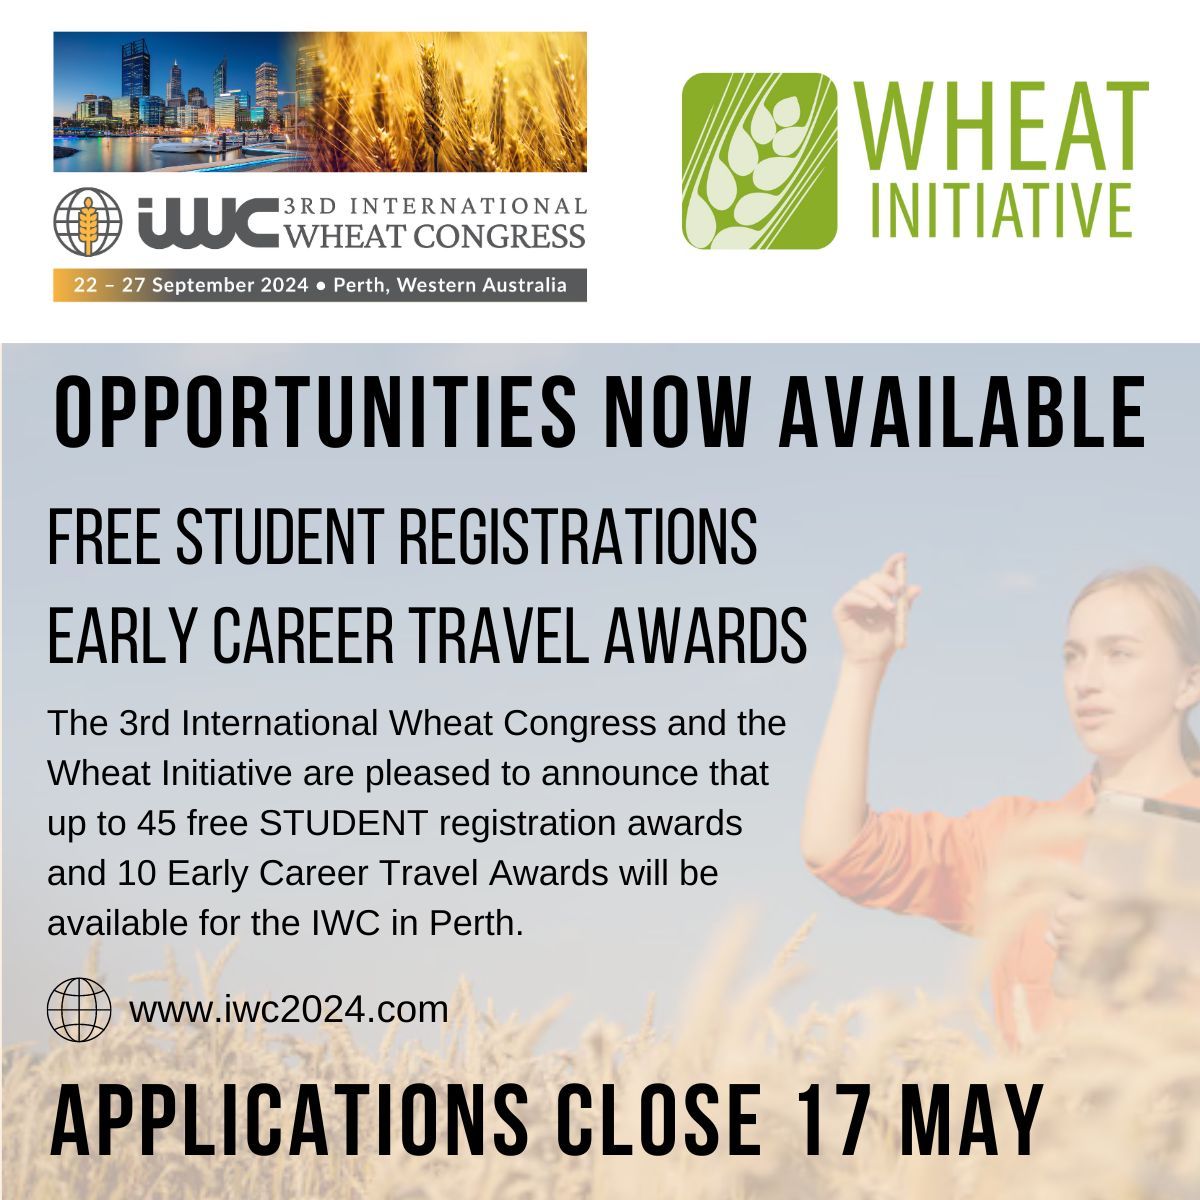 Exciting opportunities from @WheatInitiative & 3rd International Wheat Congress: 👉45 FREE student registration awards 👉10 Awards (upto 2000 Euro) for early career researchers Visit & apply- wheatinitiative.org/opportunities and iwc2024.com .